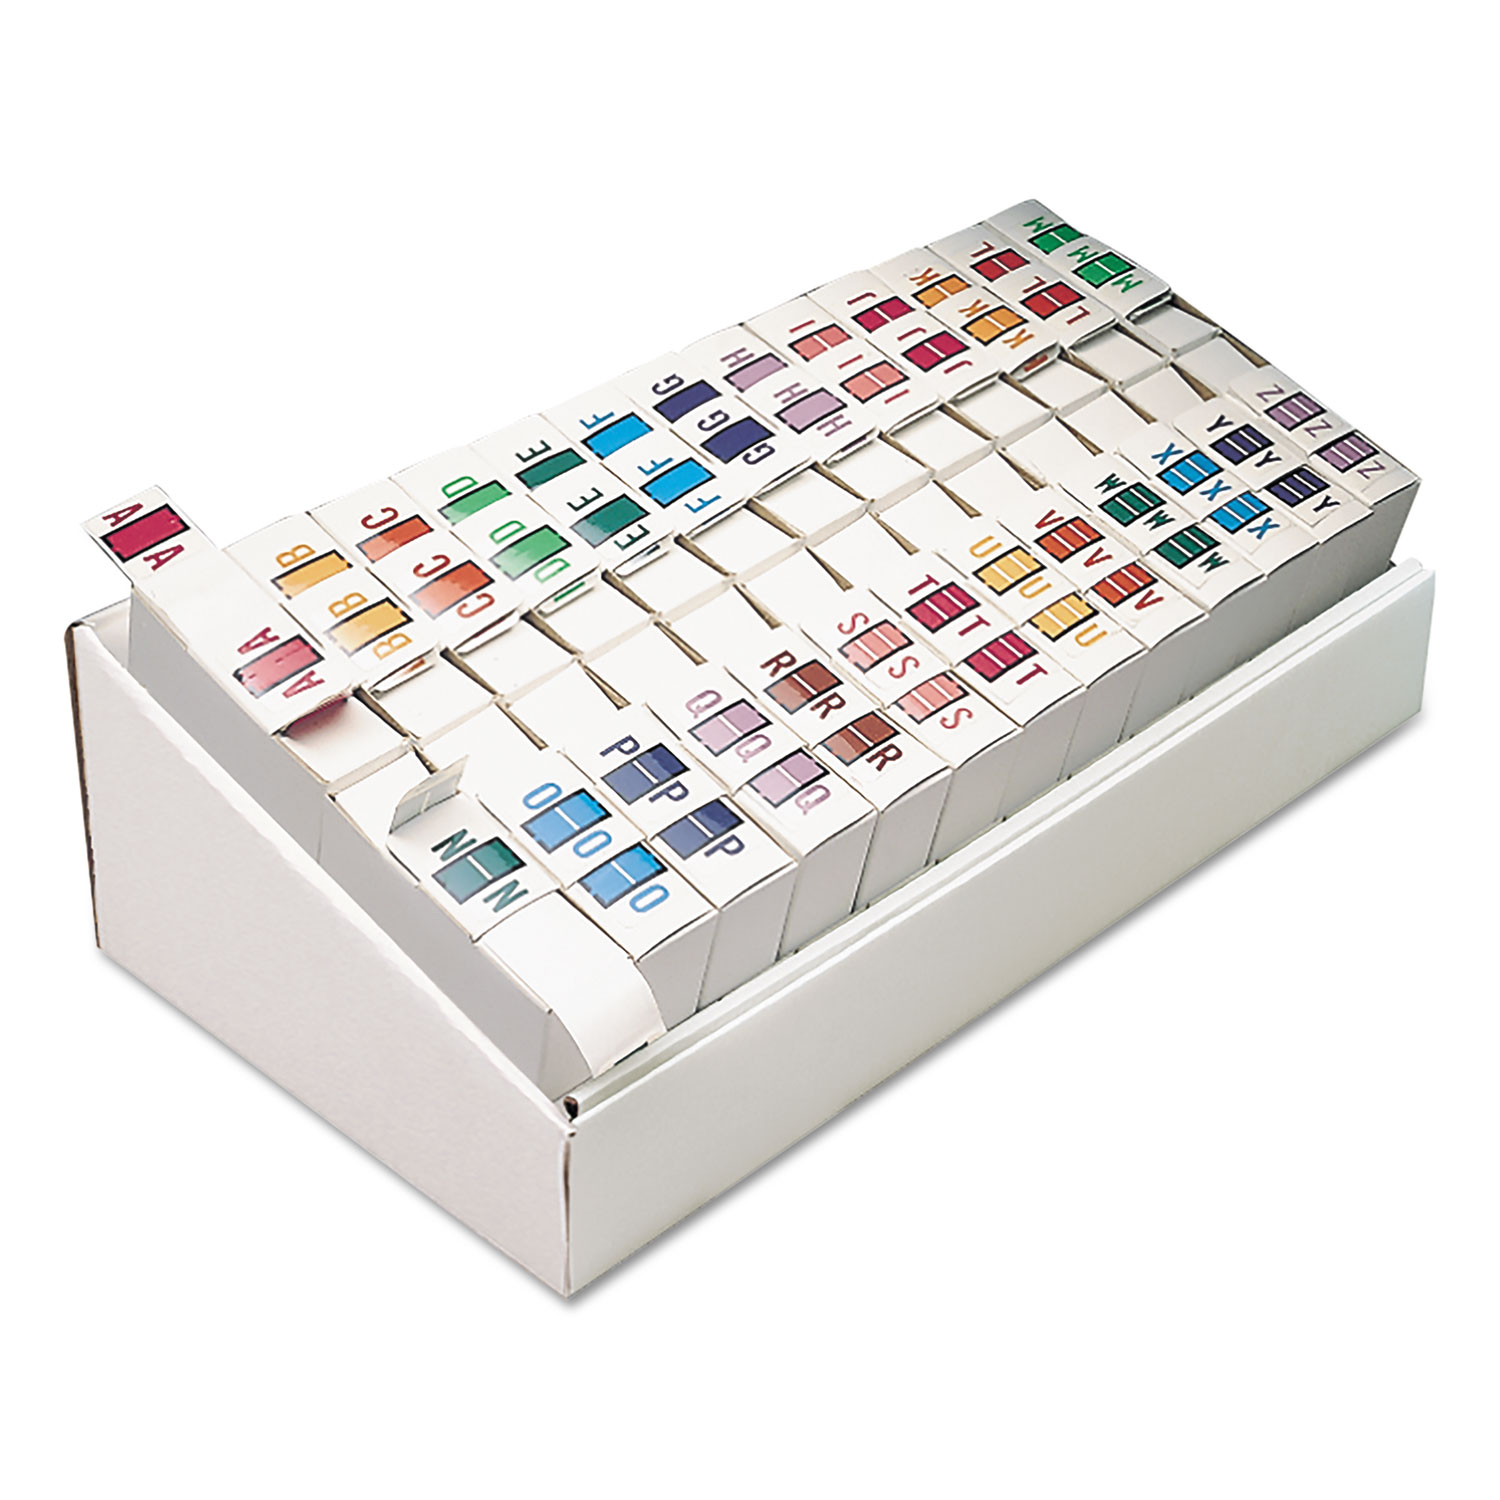  Smead 67070 A-Z Color-Coded End Tab Filing Labels, A-Z, 1 x 1.25, White, 500/Roll, 26 Rolls/Box (SMD67070) 